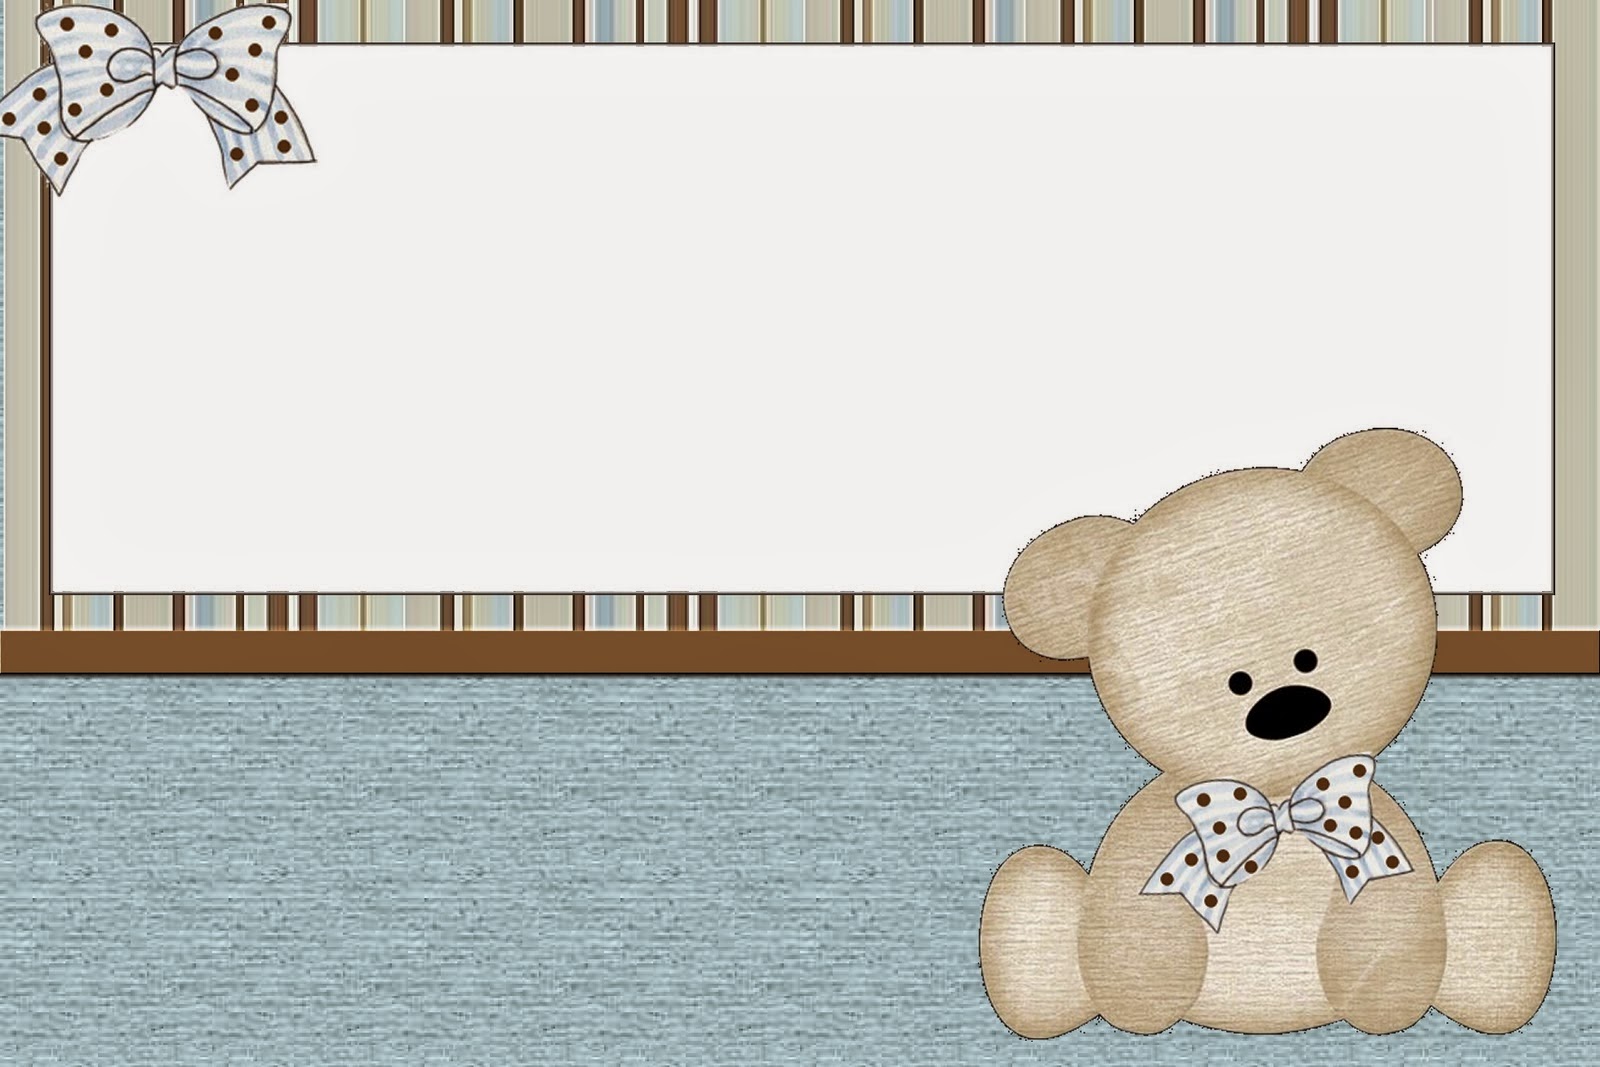 Teddy Bear Family, Free Printable Invitations, Labels or Cards.